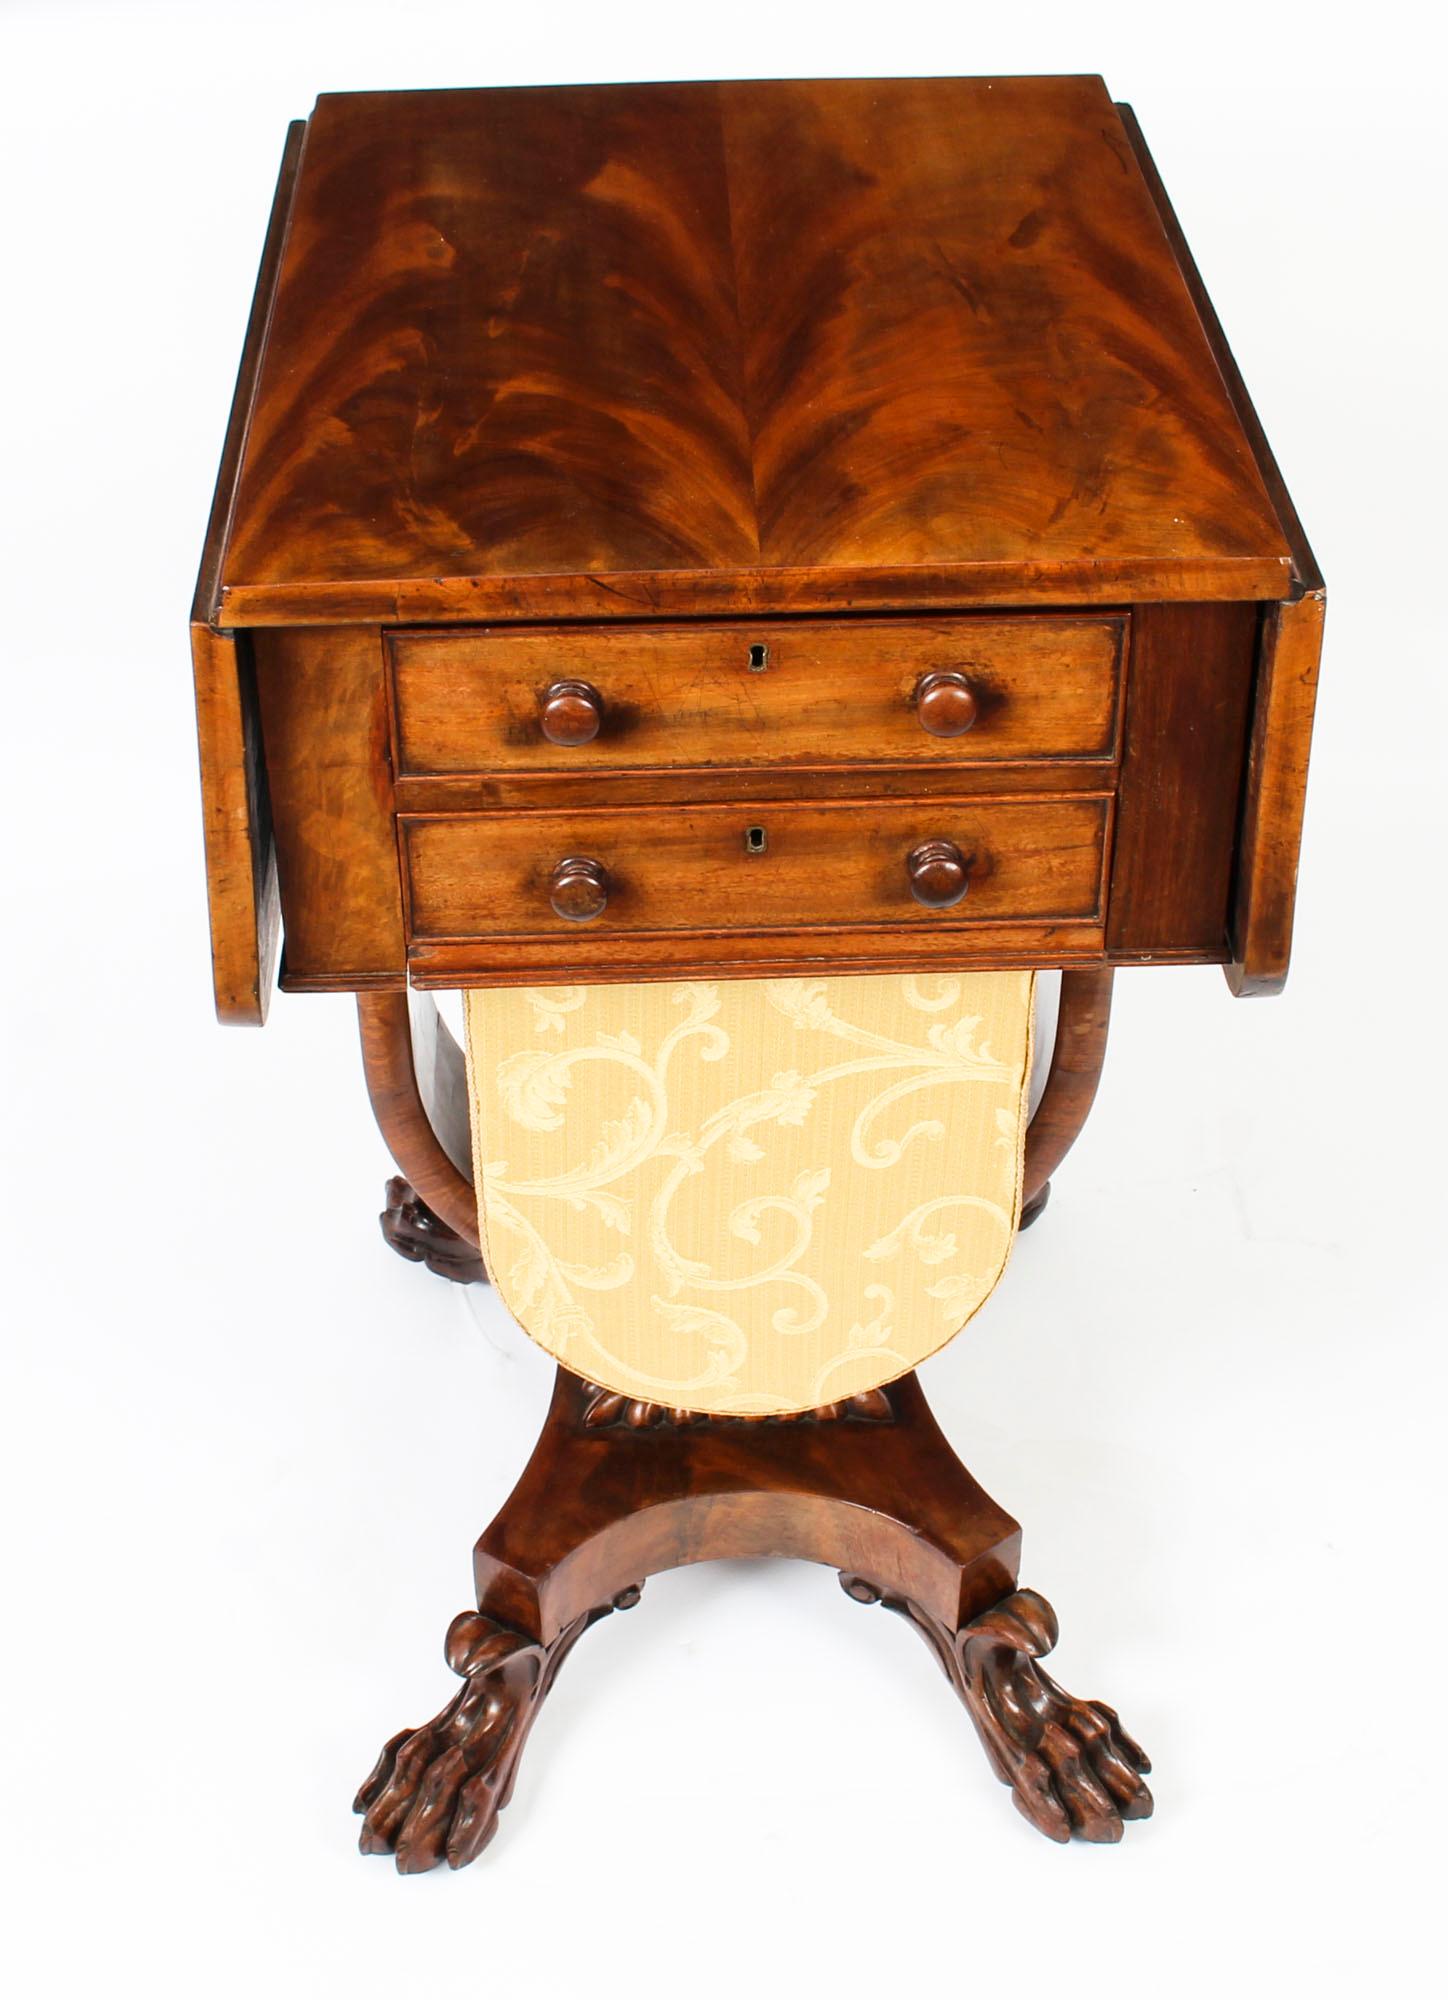 An exquisite antique William IV flame mahogany drop leaf work table, circa 1830 in date.

The drop-leaf top with rounded corners supported by fly brackets ornamented with foliate scroll carving, above two cock-beaded drawers to one side and